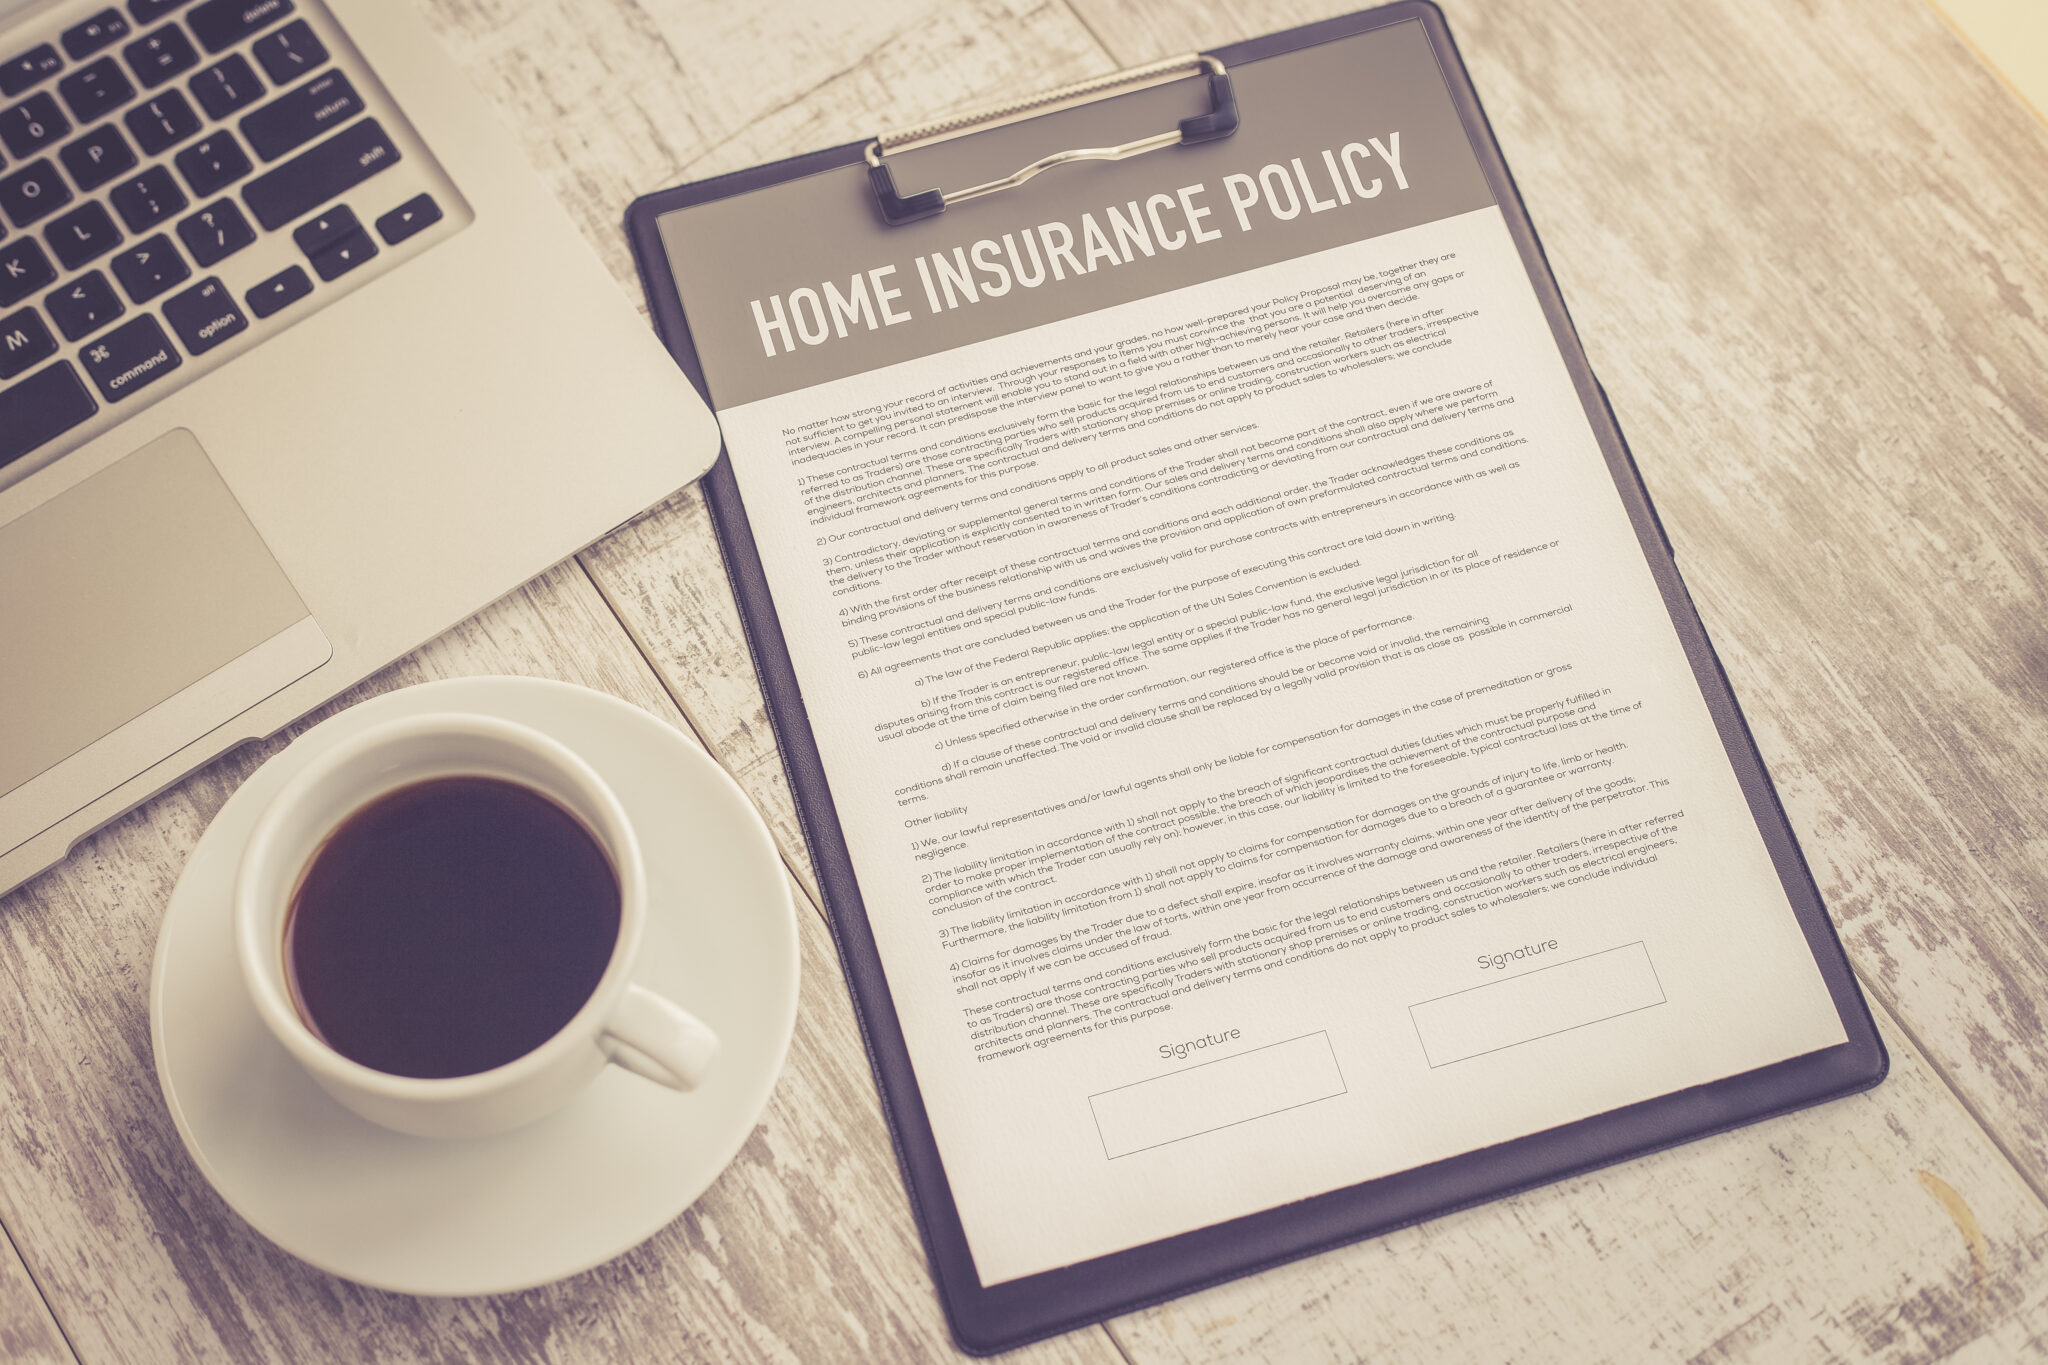 Home insurance policy form sitting next to laptop.